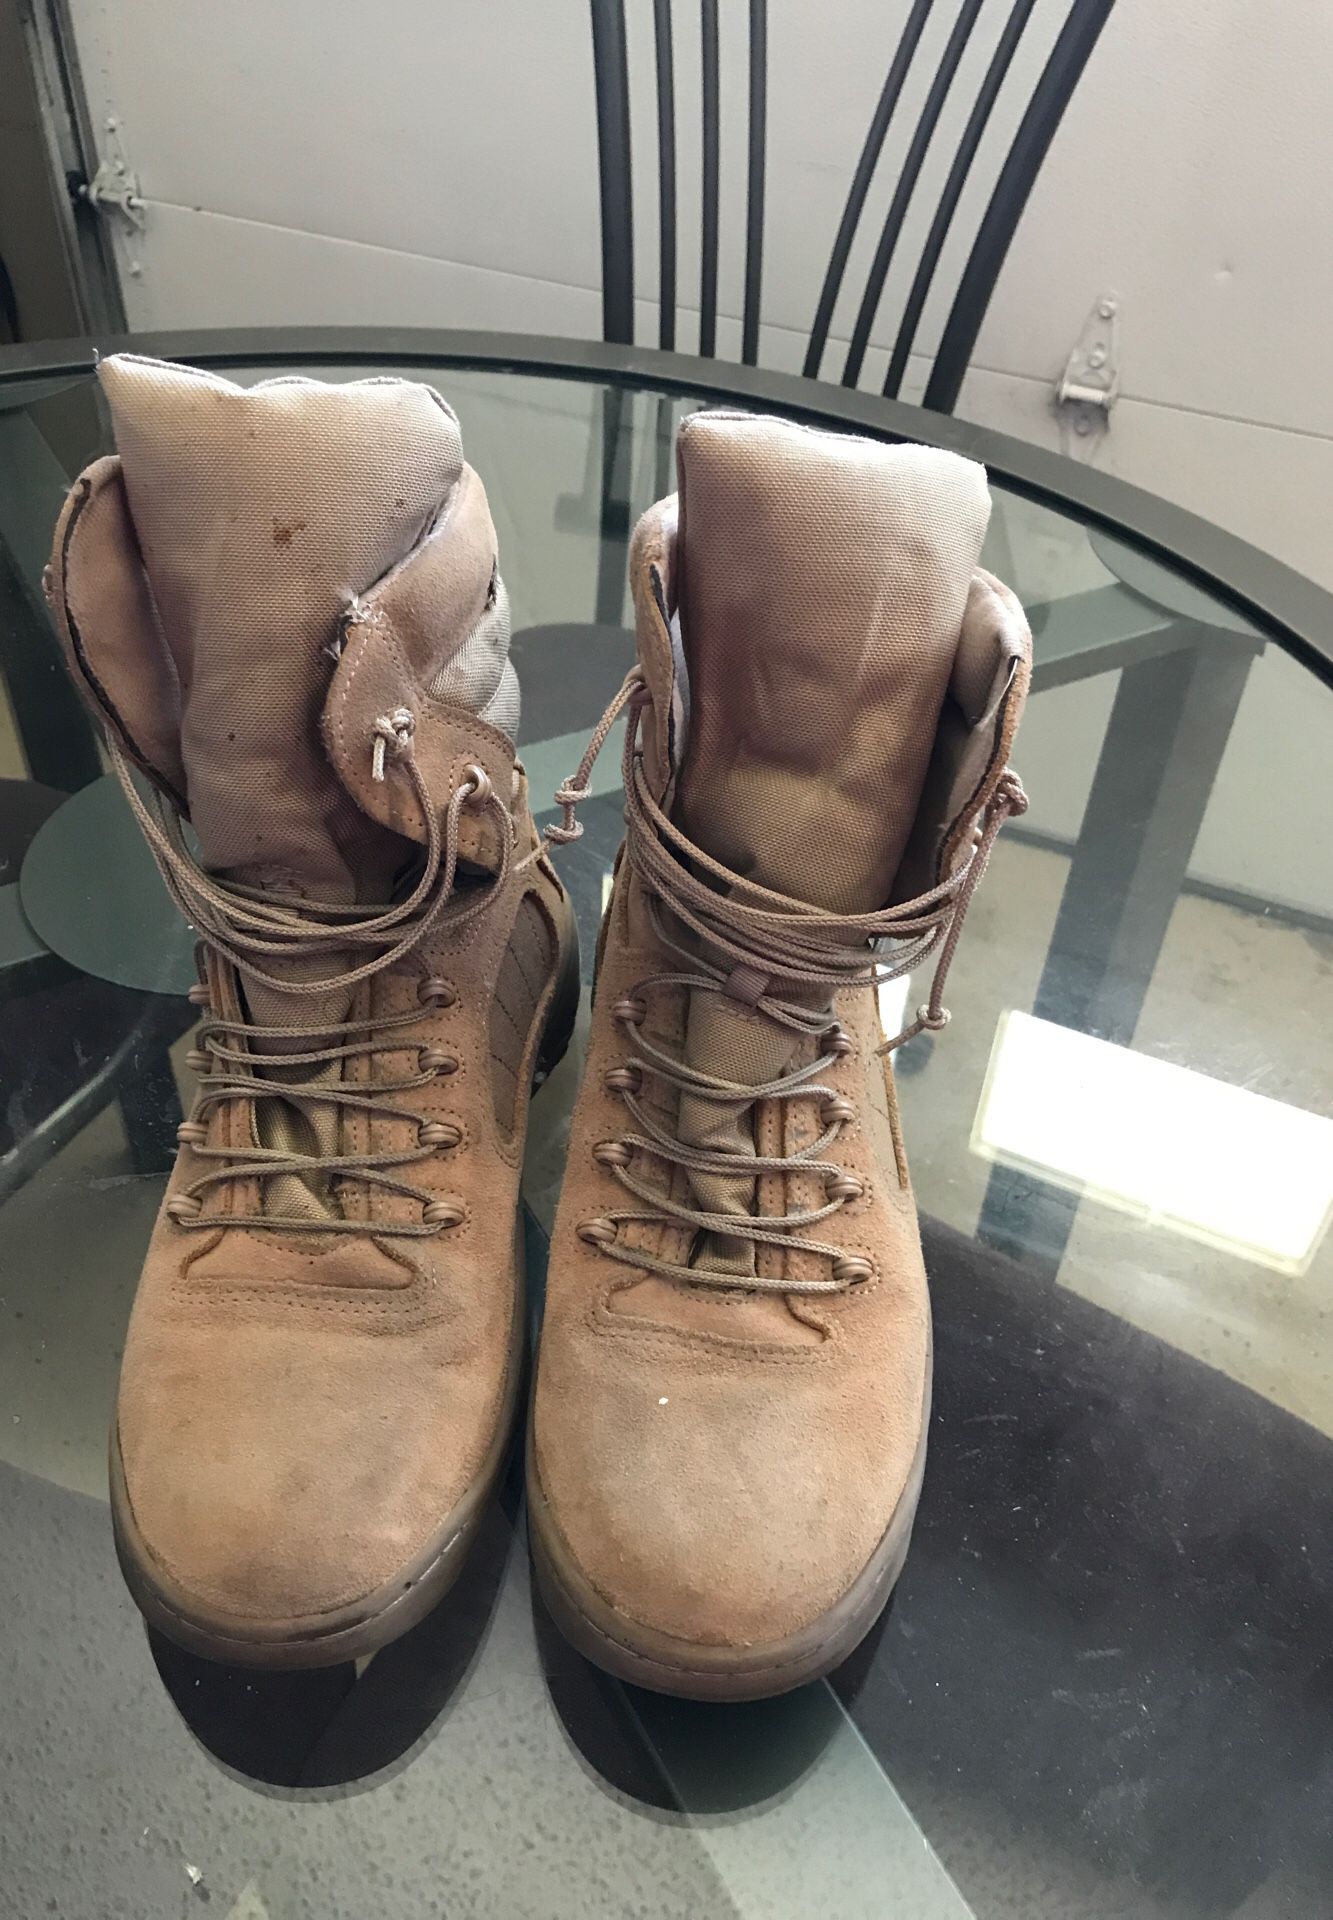 Used Reebok Military Boots size 9.5